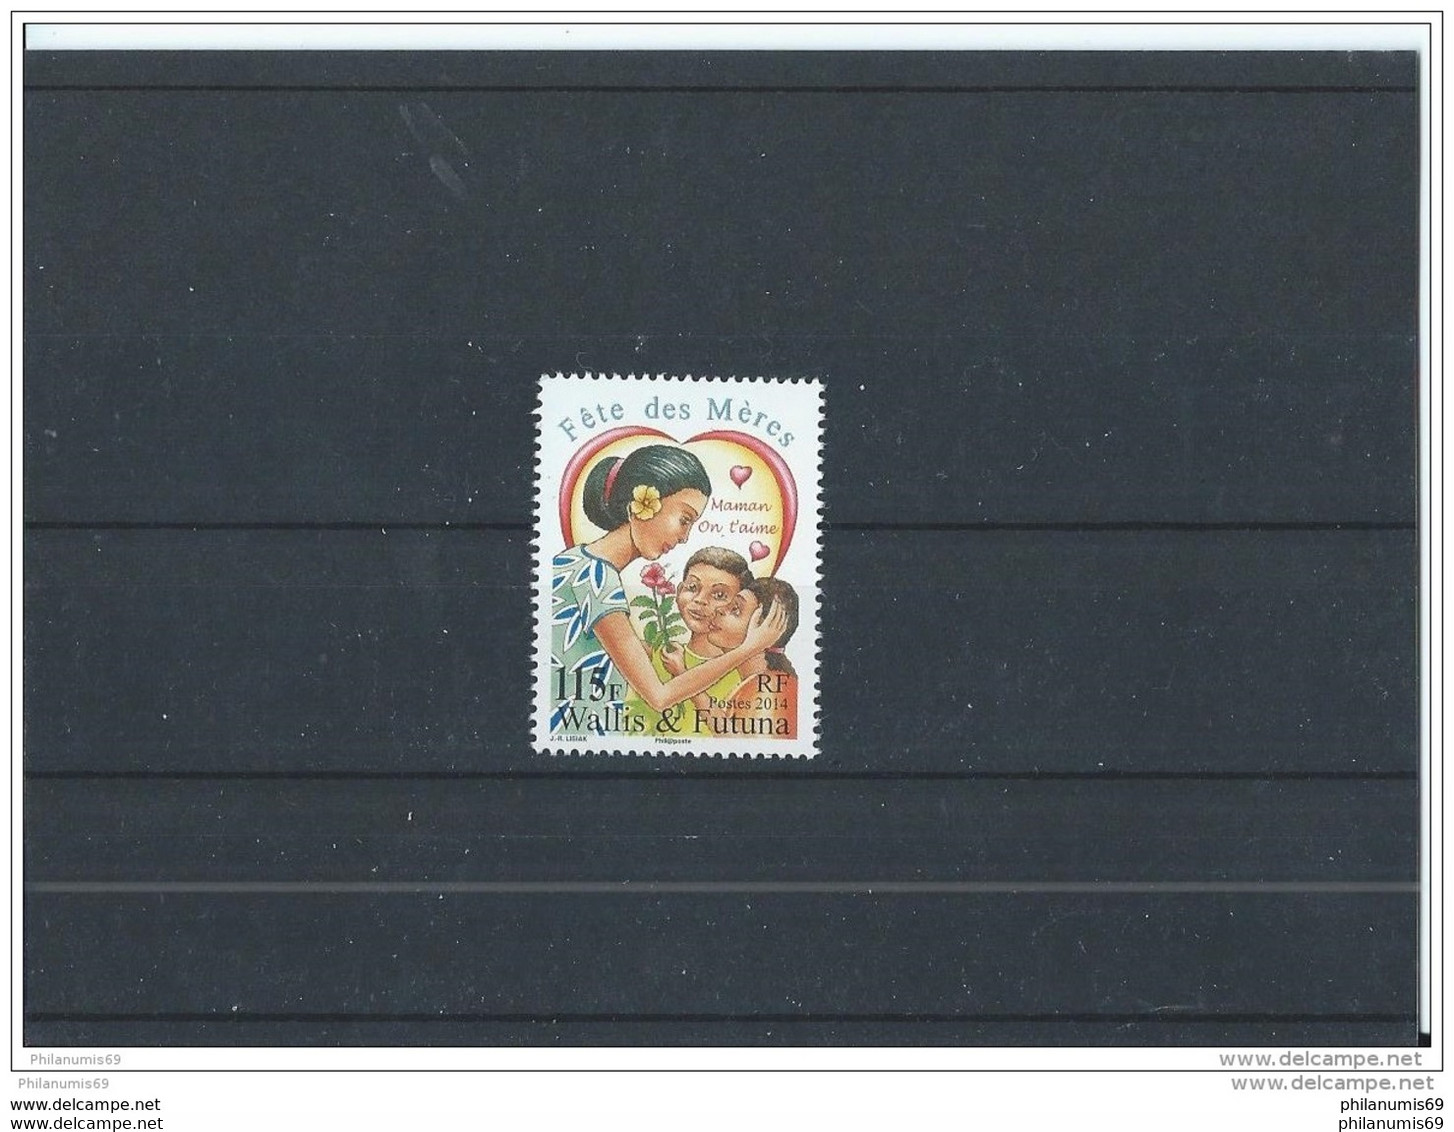 WALLIS ET FUTUNA 2014 - YT N°815 NEUF SANS CHARNIERE ** (MNH) GOMME D'ORIGINE LUXE - Unused Stamps